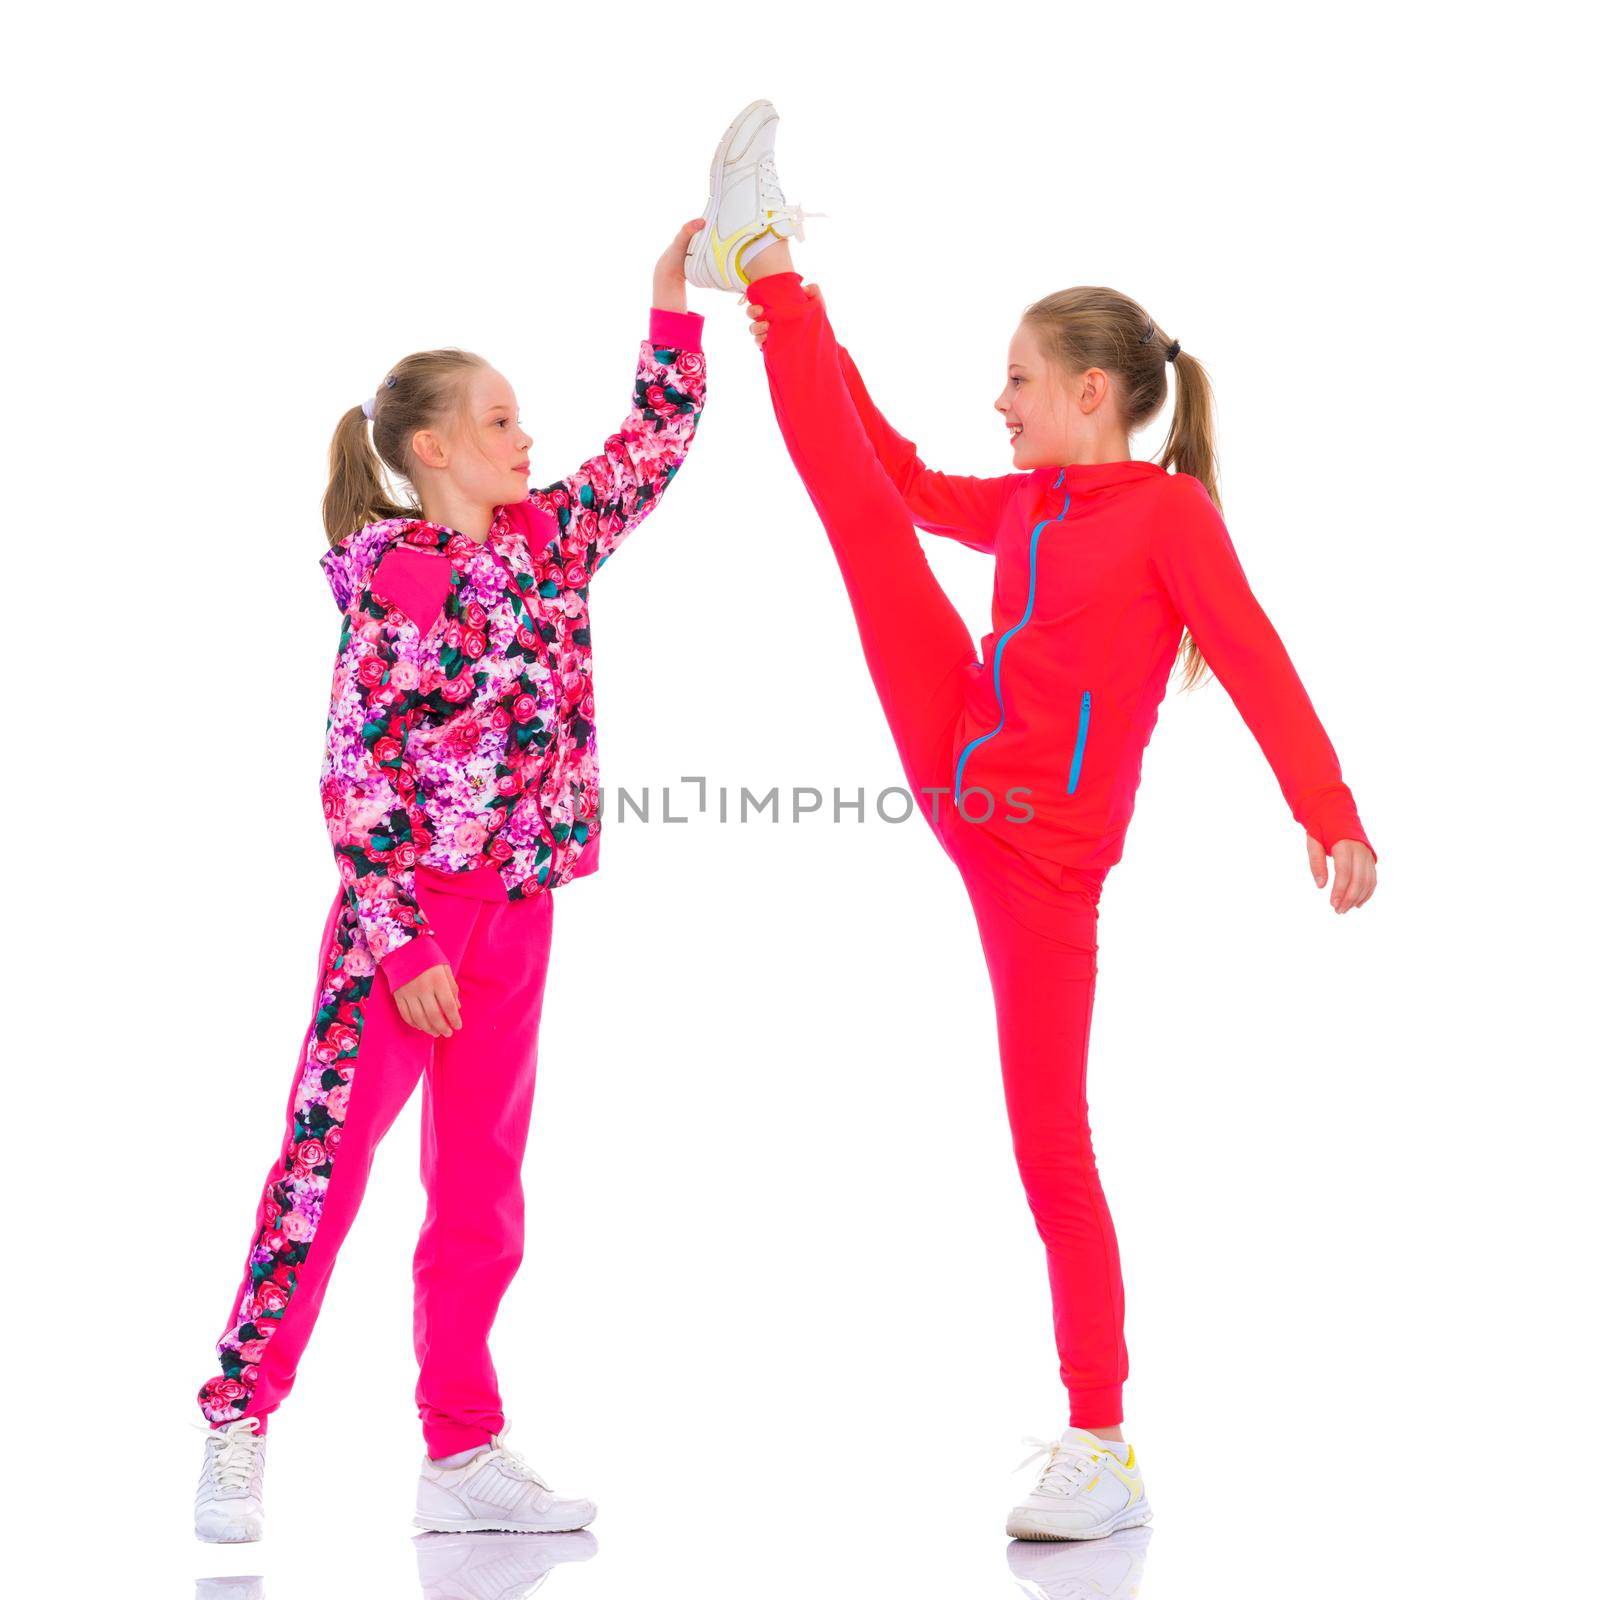 Girls gymnasts together make a twine. The concept of people, sport, fitness, healthy lifestyle. Isolated on white background.